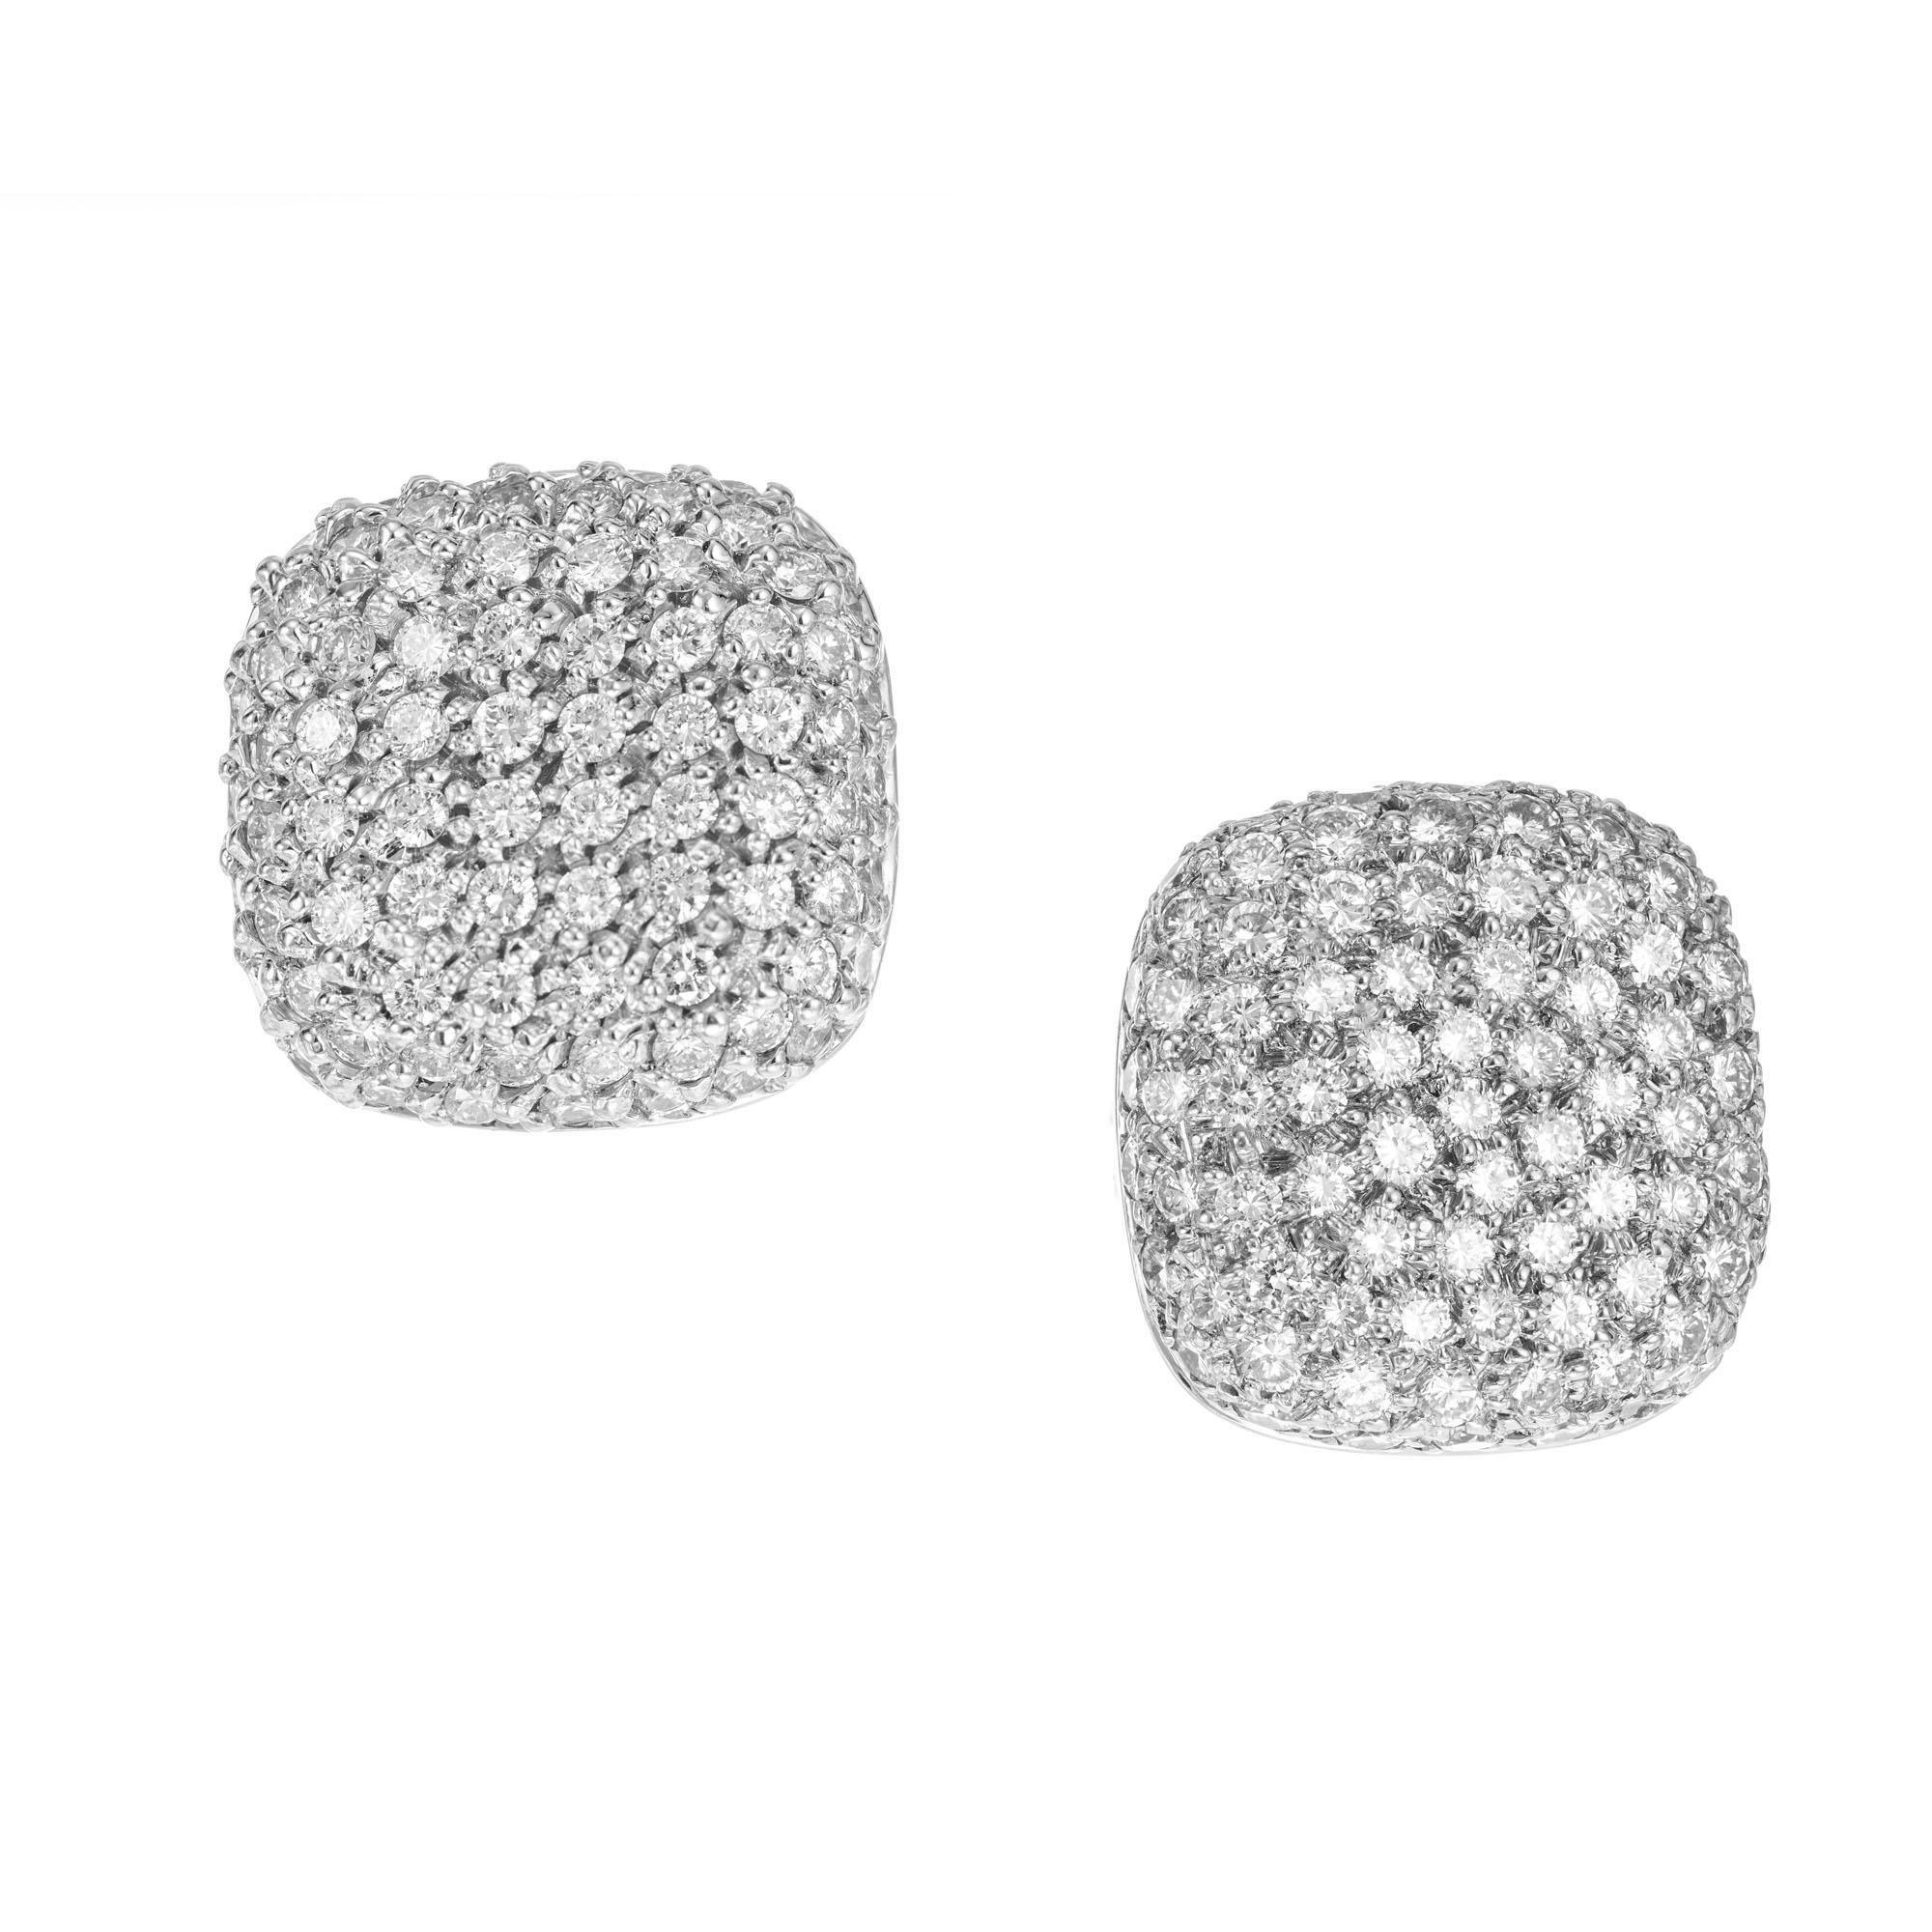 Pave diamond set 14k white gold clip post earrings. 160 round diamonds set in square shape settings, approximately 2.10cts. 

160 round diamonds, approx. total weight: 2.10cts VS, GH
Stamped: 14k white gold
Weight: 10.7 grams
Length: .59